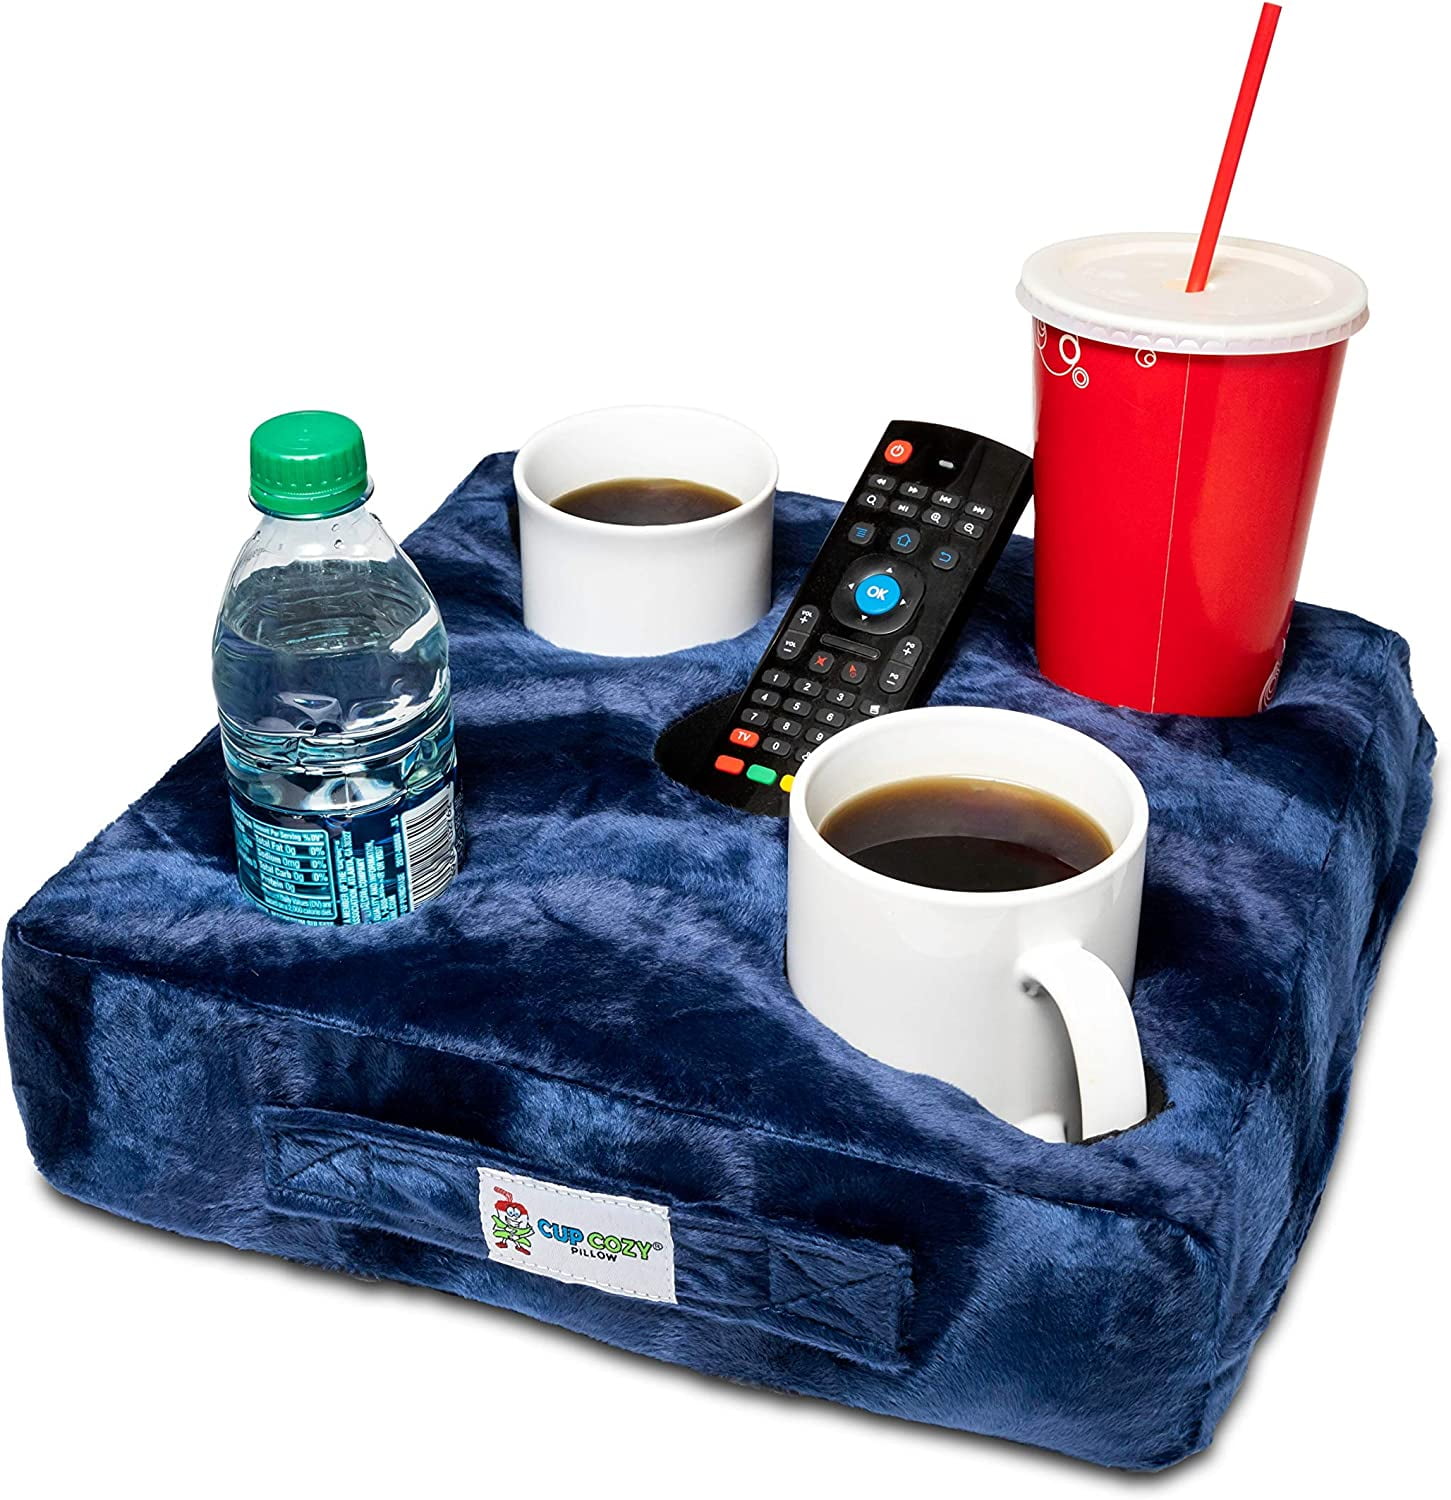 Cup Cozy Deluxe Pillow (Navy) As Seen on TV -The world's BEST cup